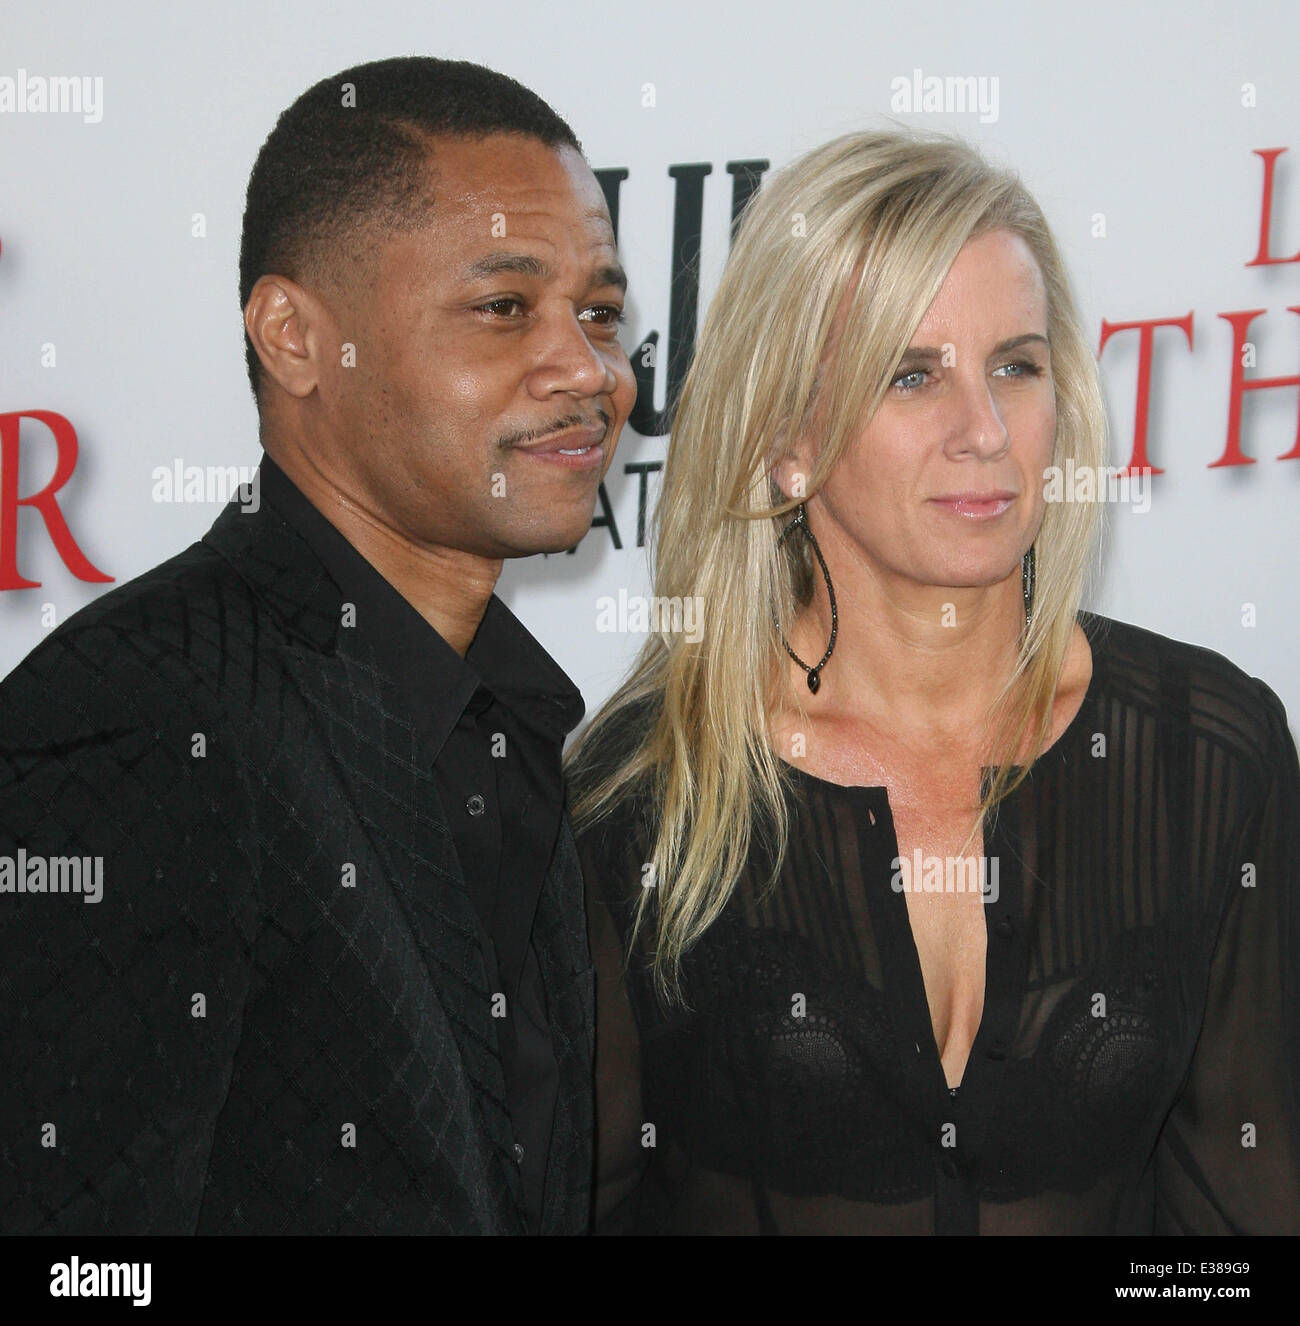 Lee Daniels’ The Butler Premiere held at the L.A.Live Regal Cinemas - Arrivals  Featuring: Cuba Gooding Jr.,wife Sara Kapfer Where: Los Angeles, CA, United States When: 12 Aug 2013 Stock Photo